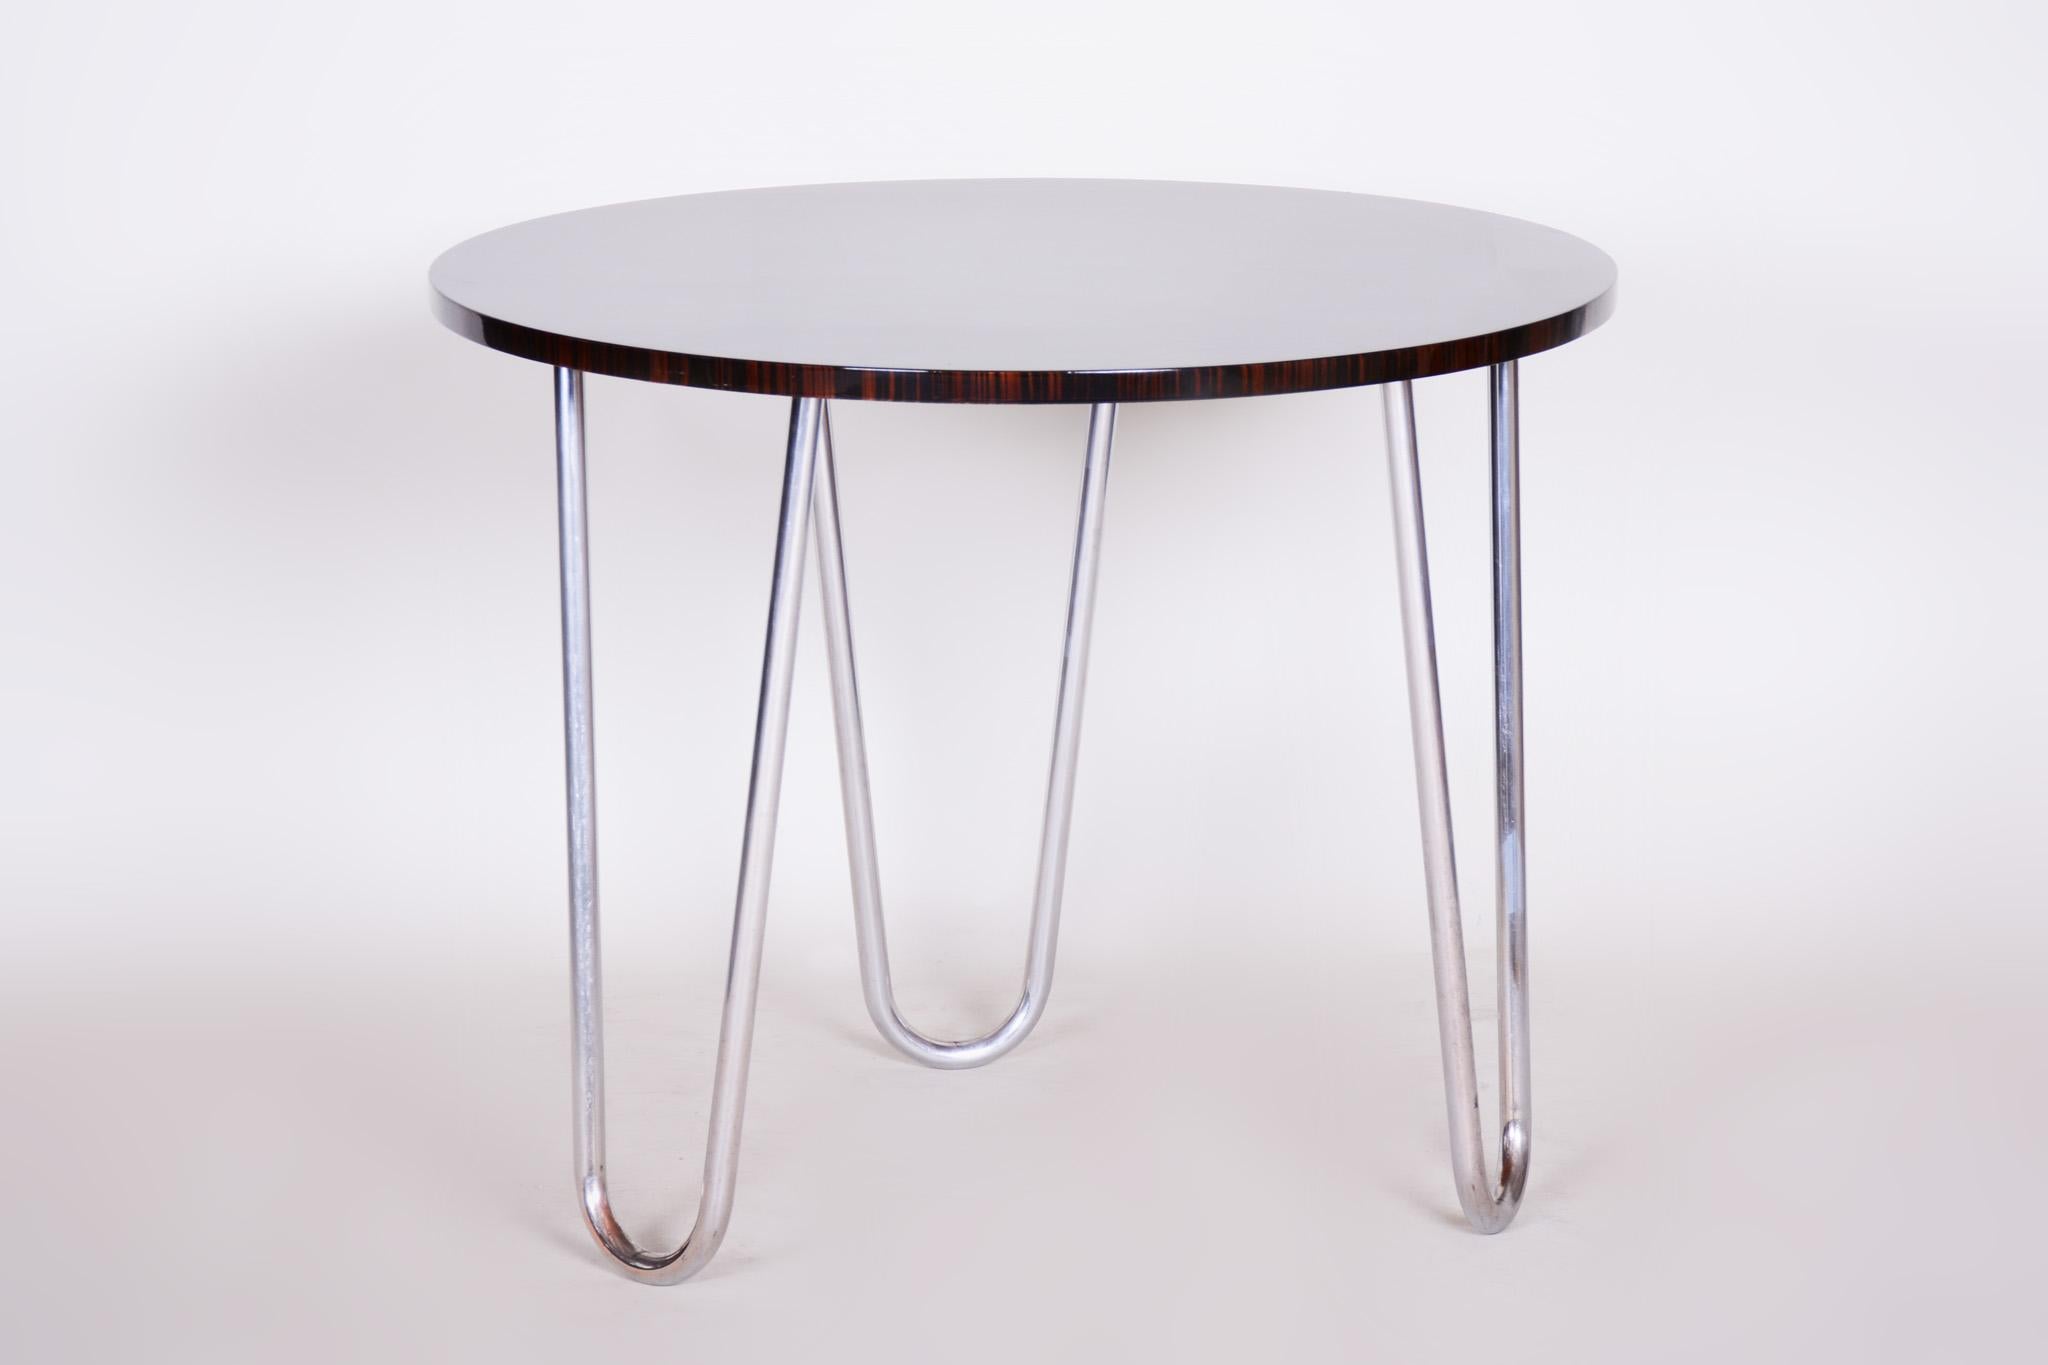 20th Century Restored Rounded Macassar Bauhaus Table, Chrome-Plated Steel, 1930s For Sale 3